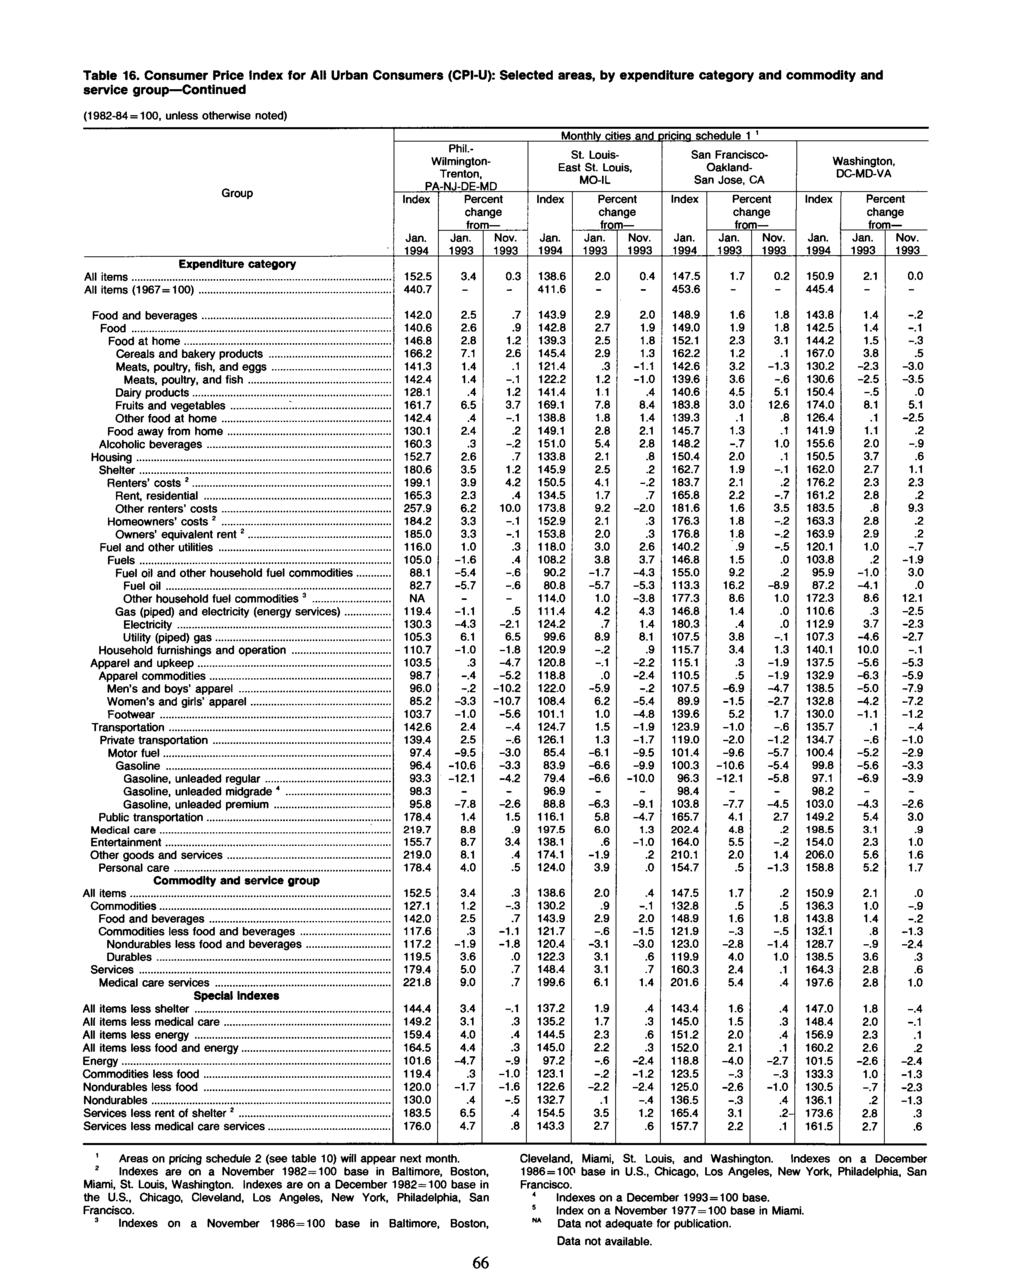 Table 16. Consumer Price for All Urban Consumers (CPI-U): Selected areas, by expenditure category and commodity and service group Continued Group Expenditure category All items... All items (1967=100).